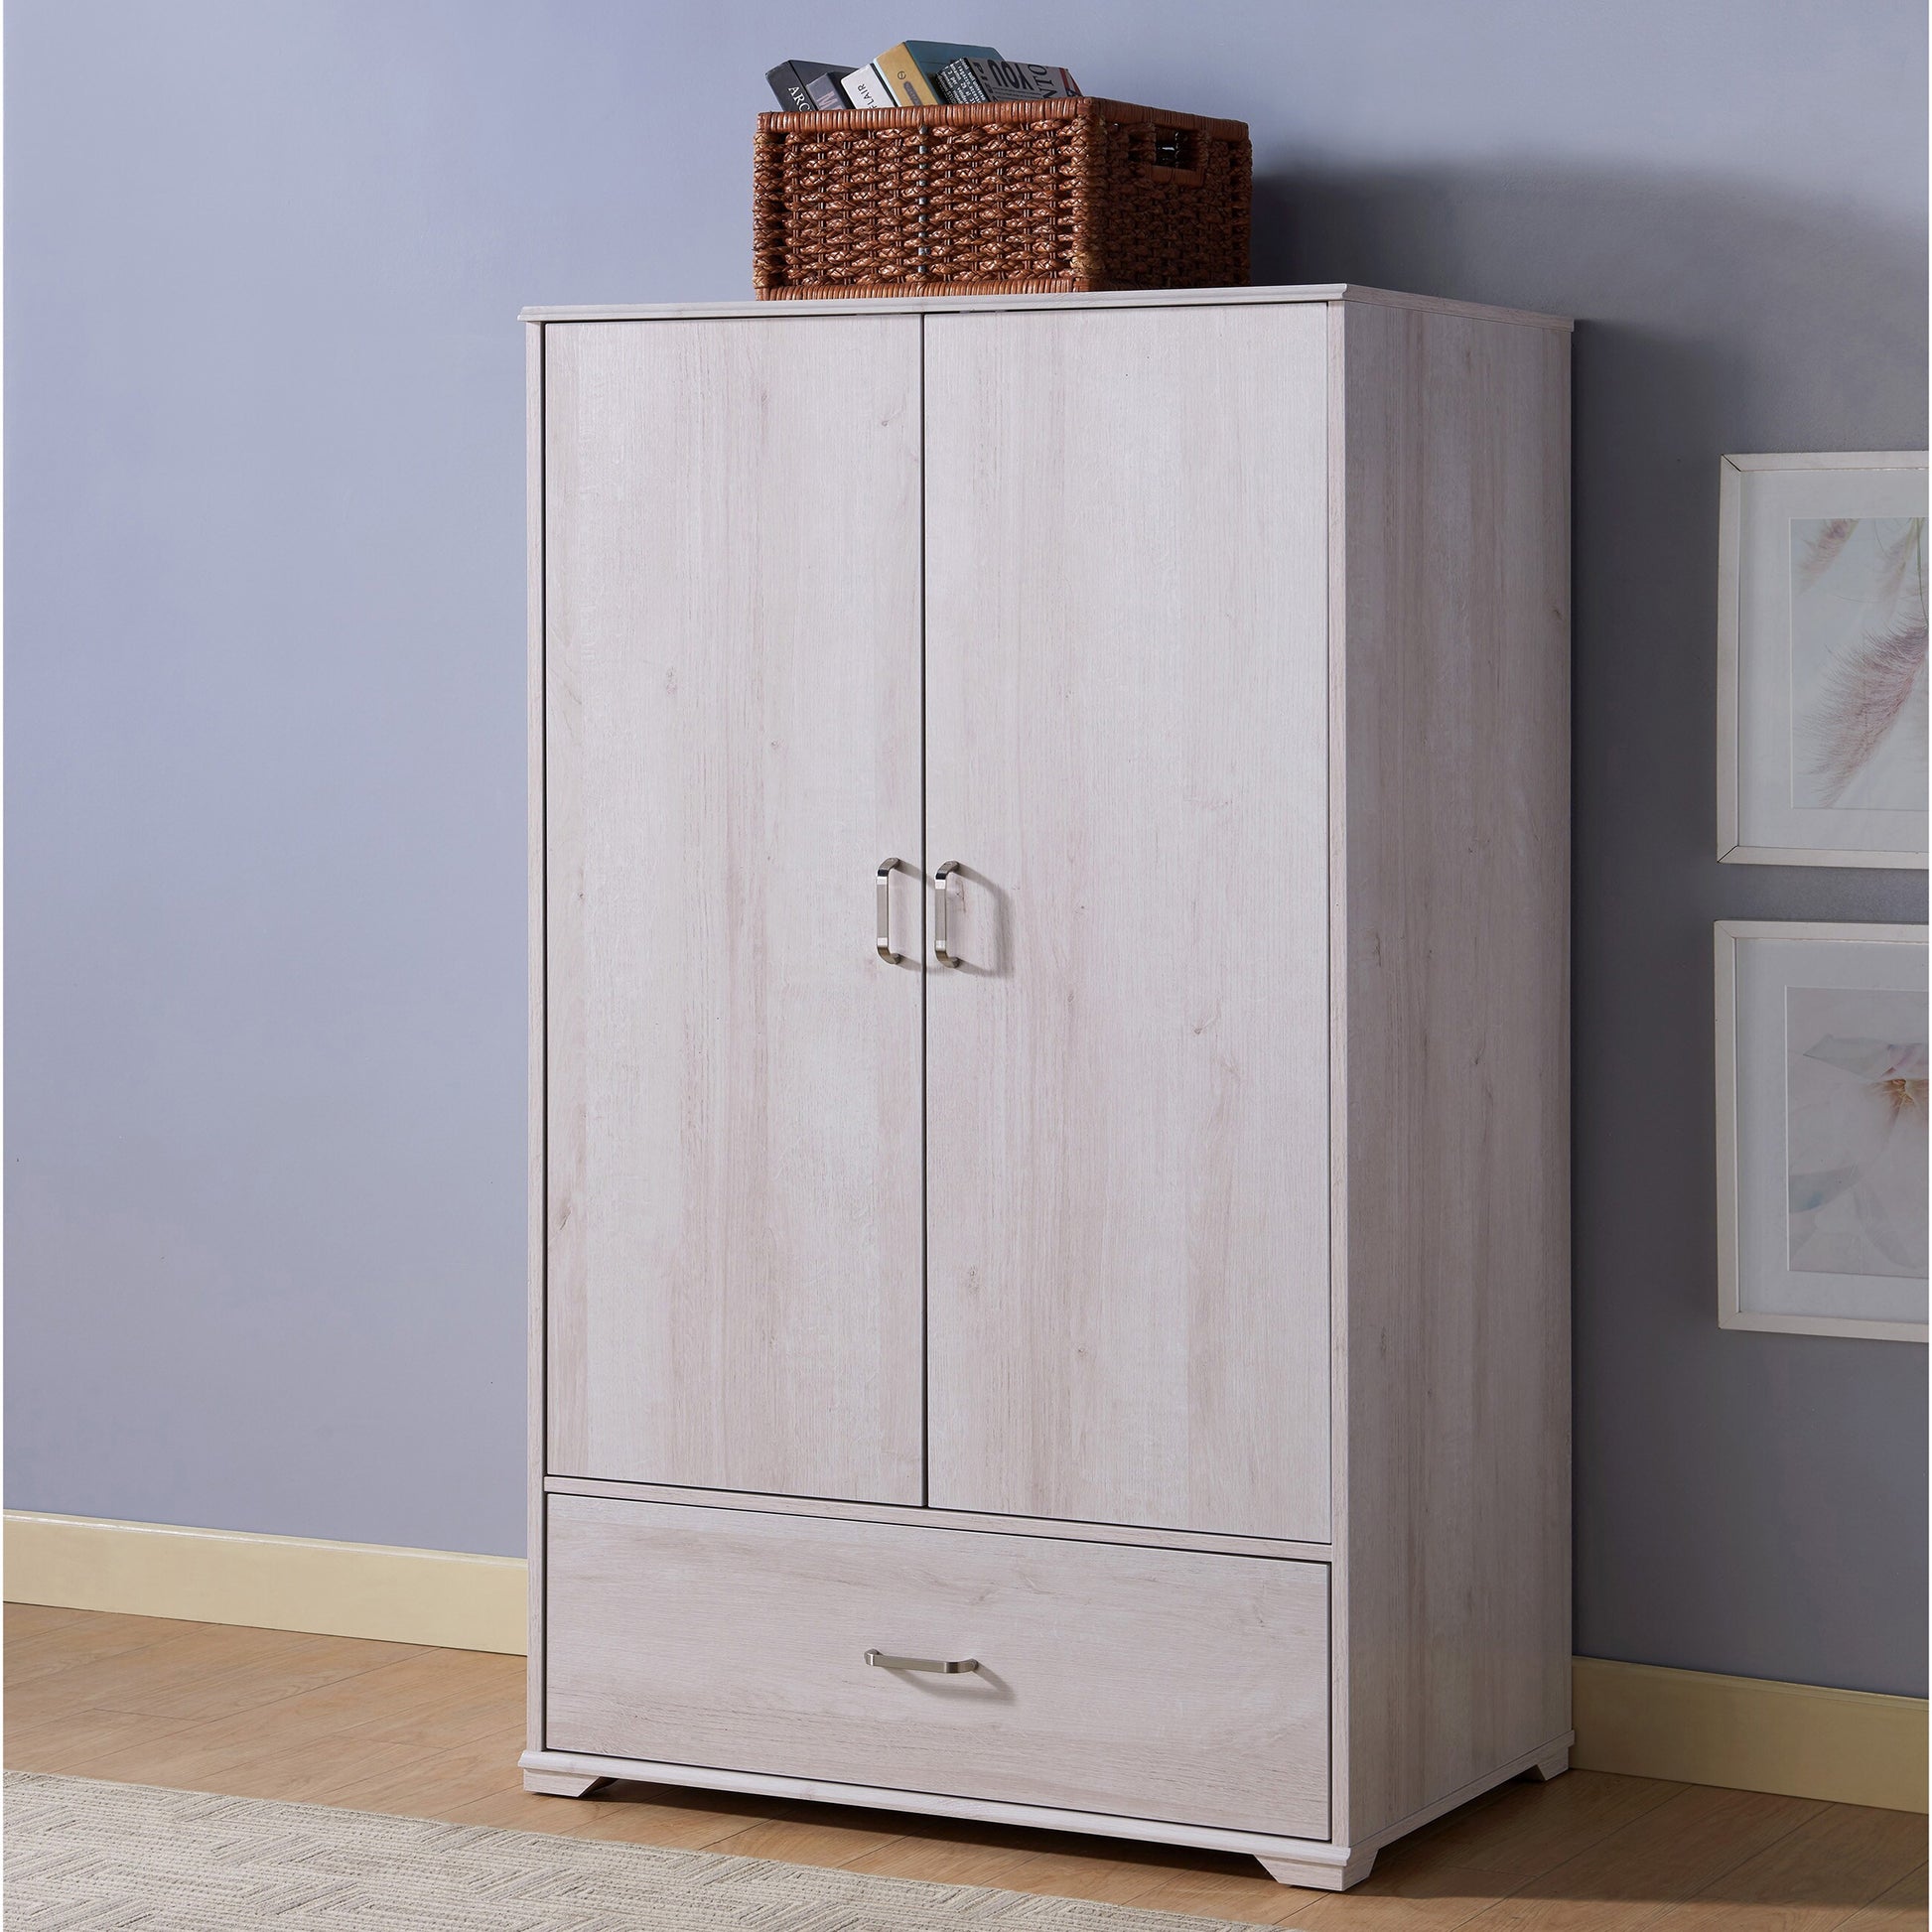 Left angled contemporary white oak two-door one-drawer wardrobe armoire with a rug and accessories